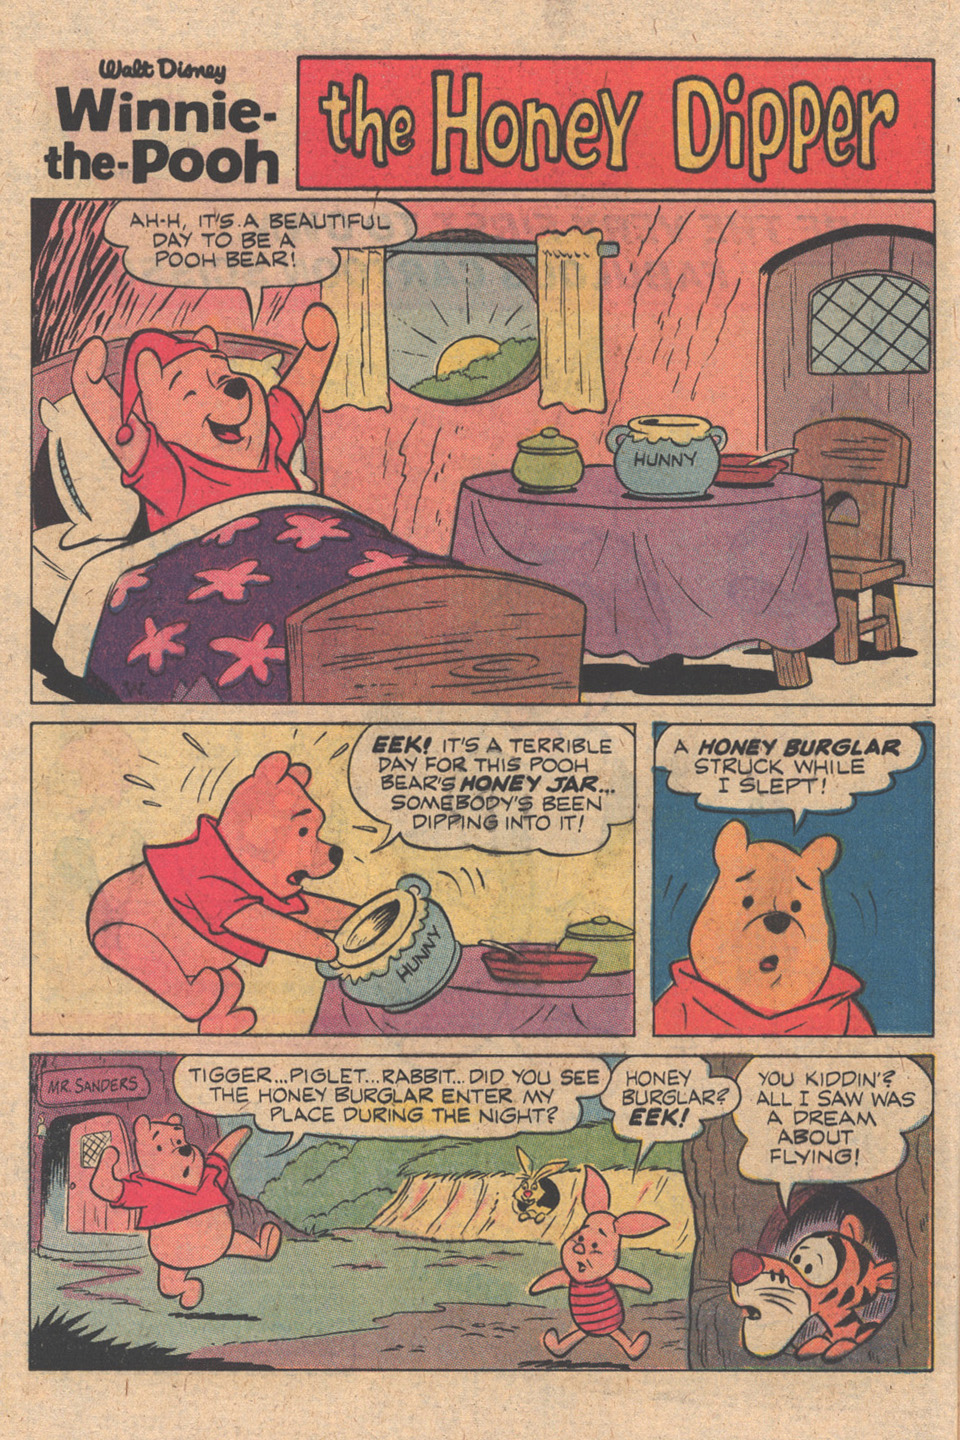 Read online Winnie-the-Pooh comic -  Issue #24 - 24